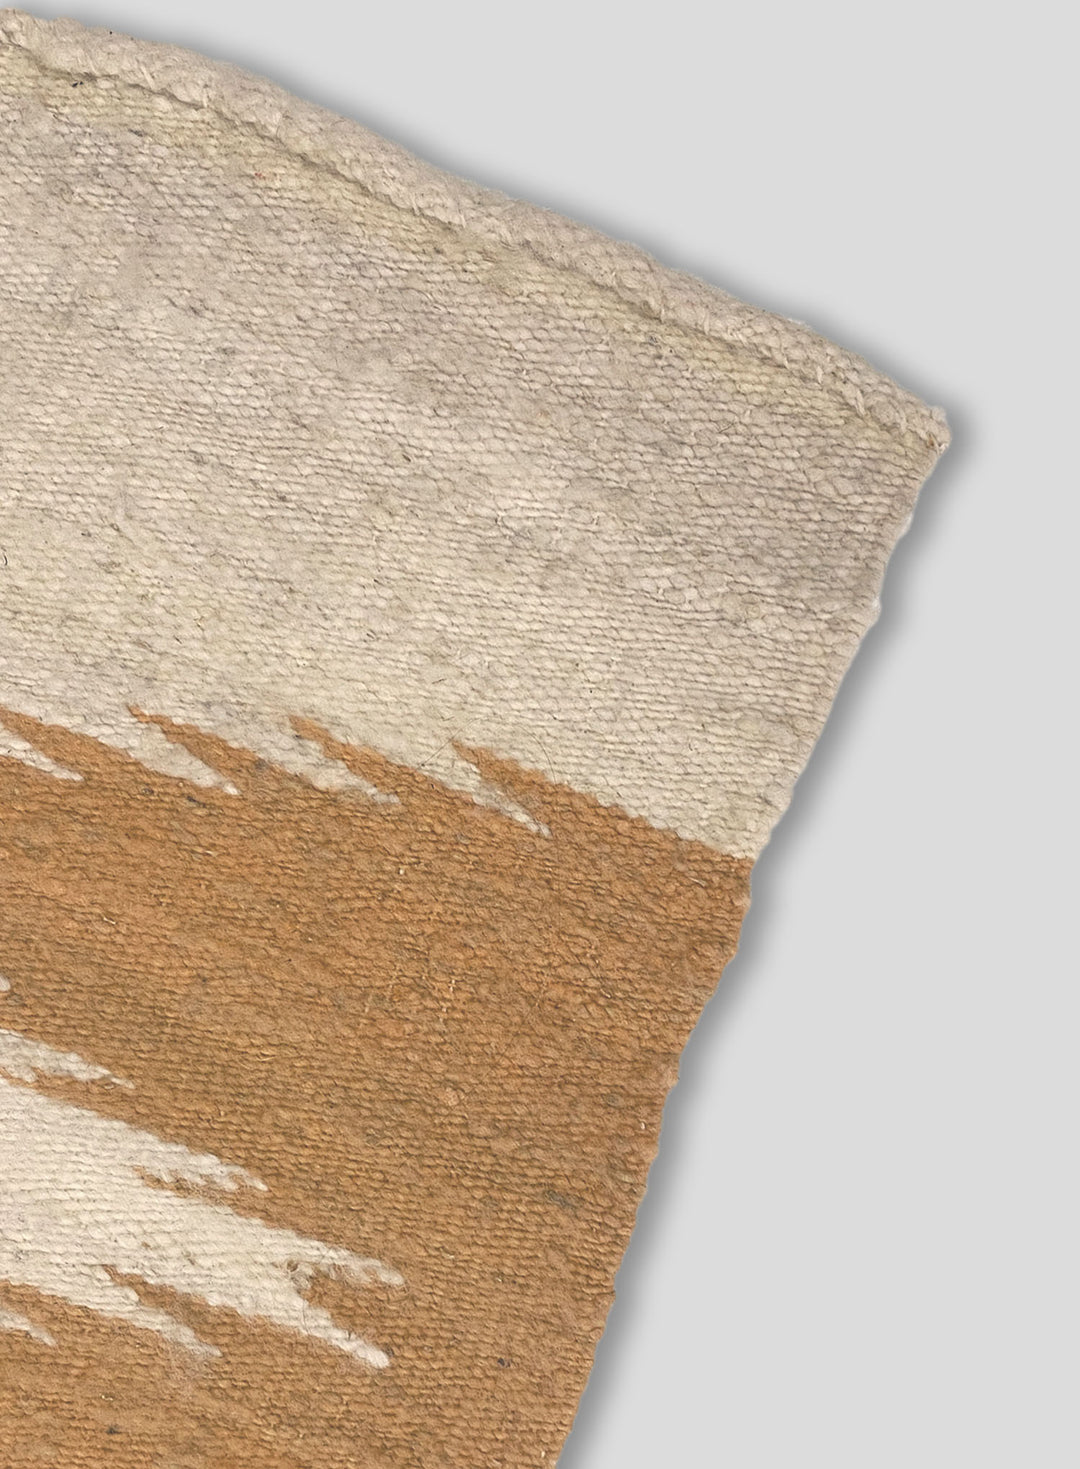 Los Picos Area Rug in Off White and Faded Gold